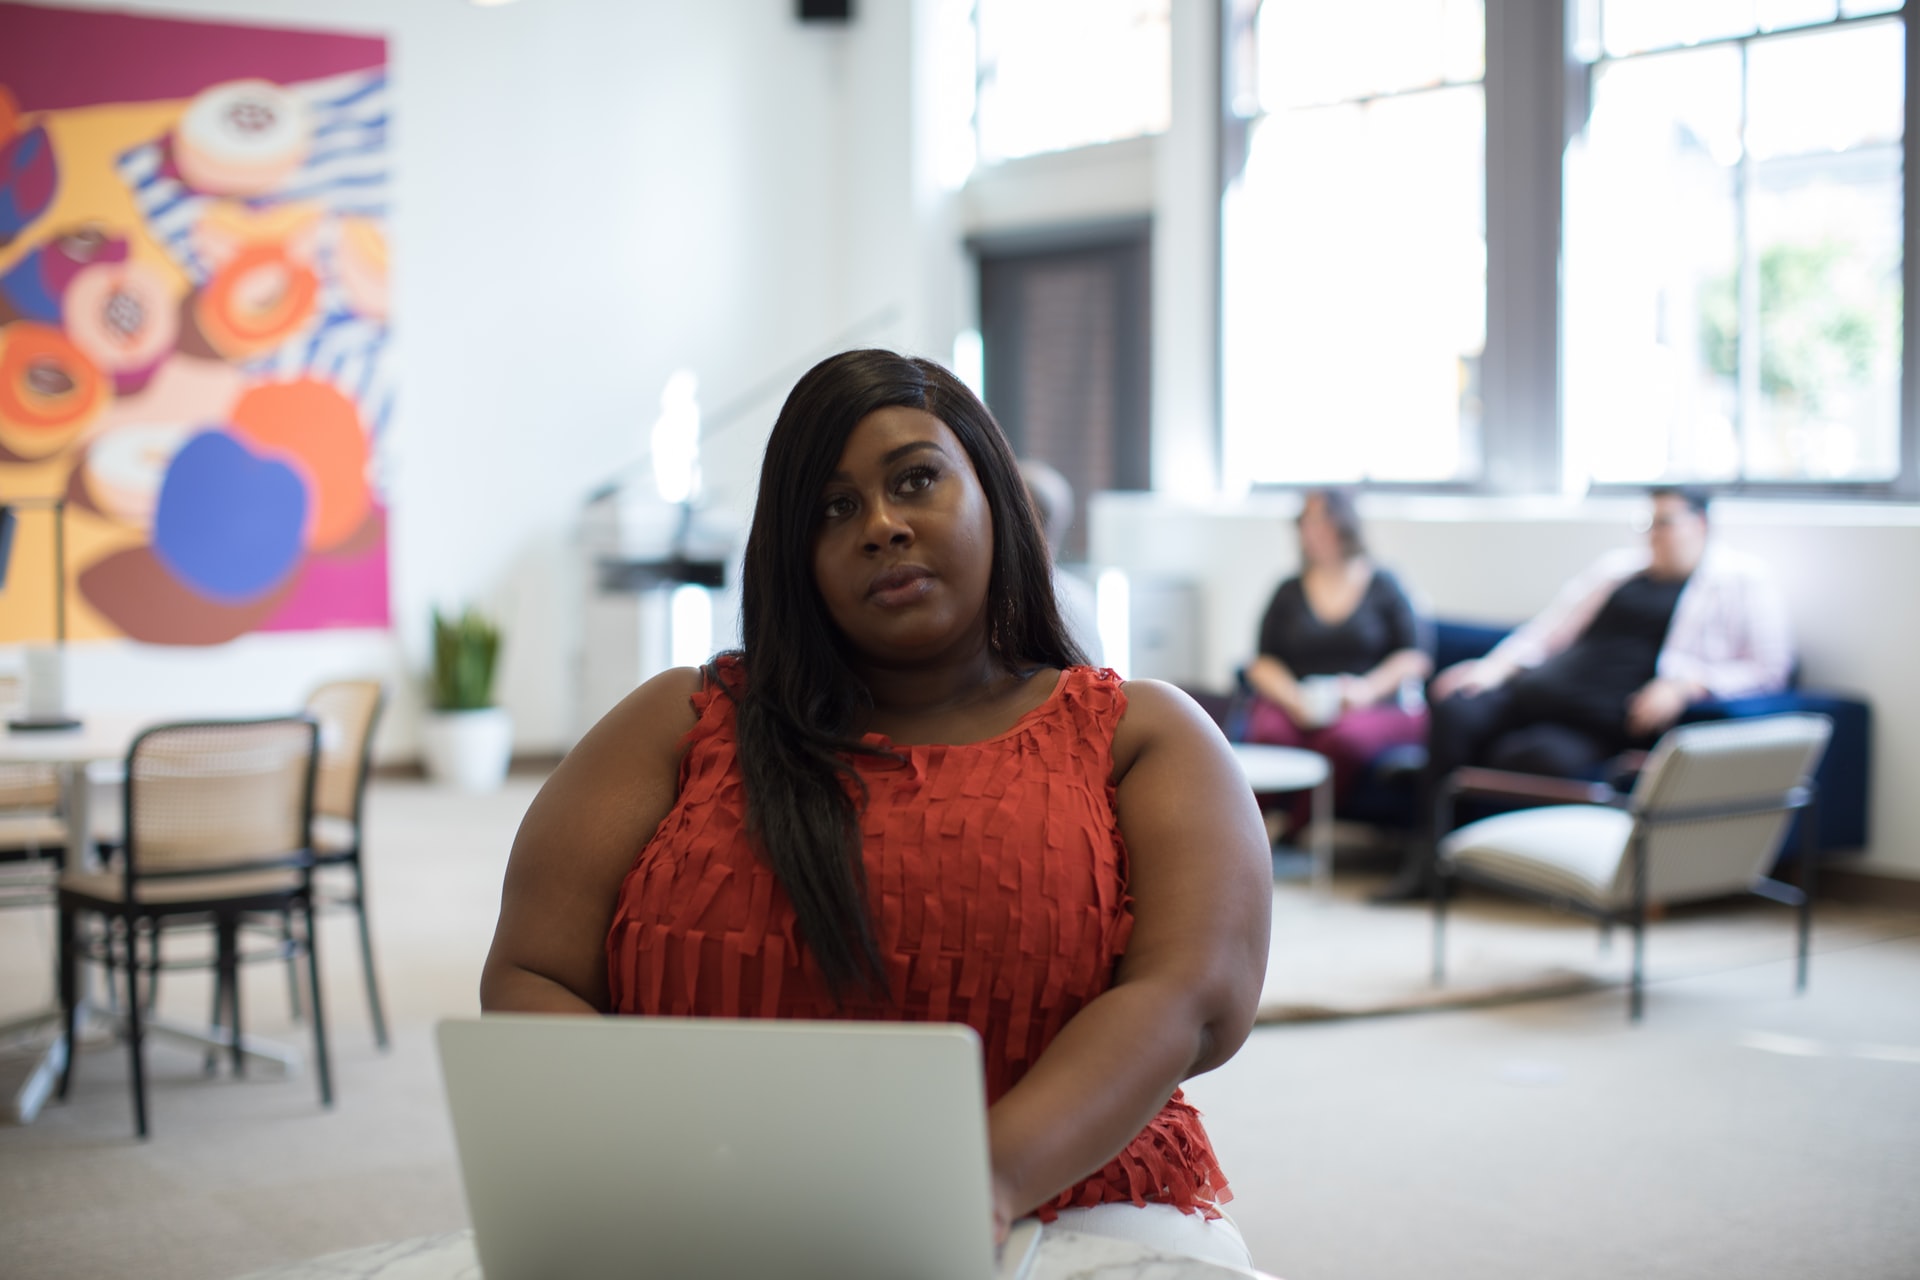 10 Ways Freelance Writers can Fight Imposter Syndrome Featured image: young black woman sitting in front of a laptop pondering something.